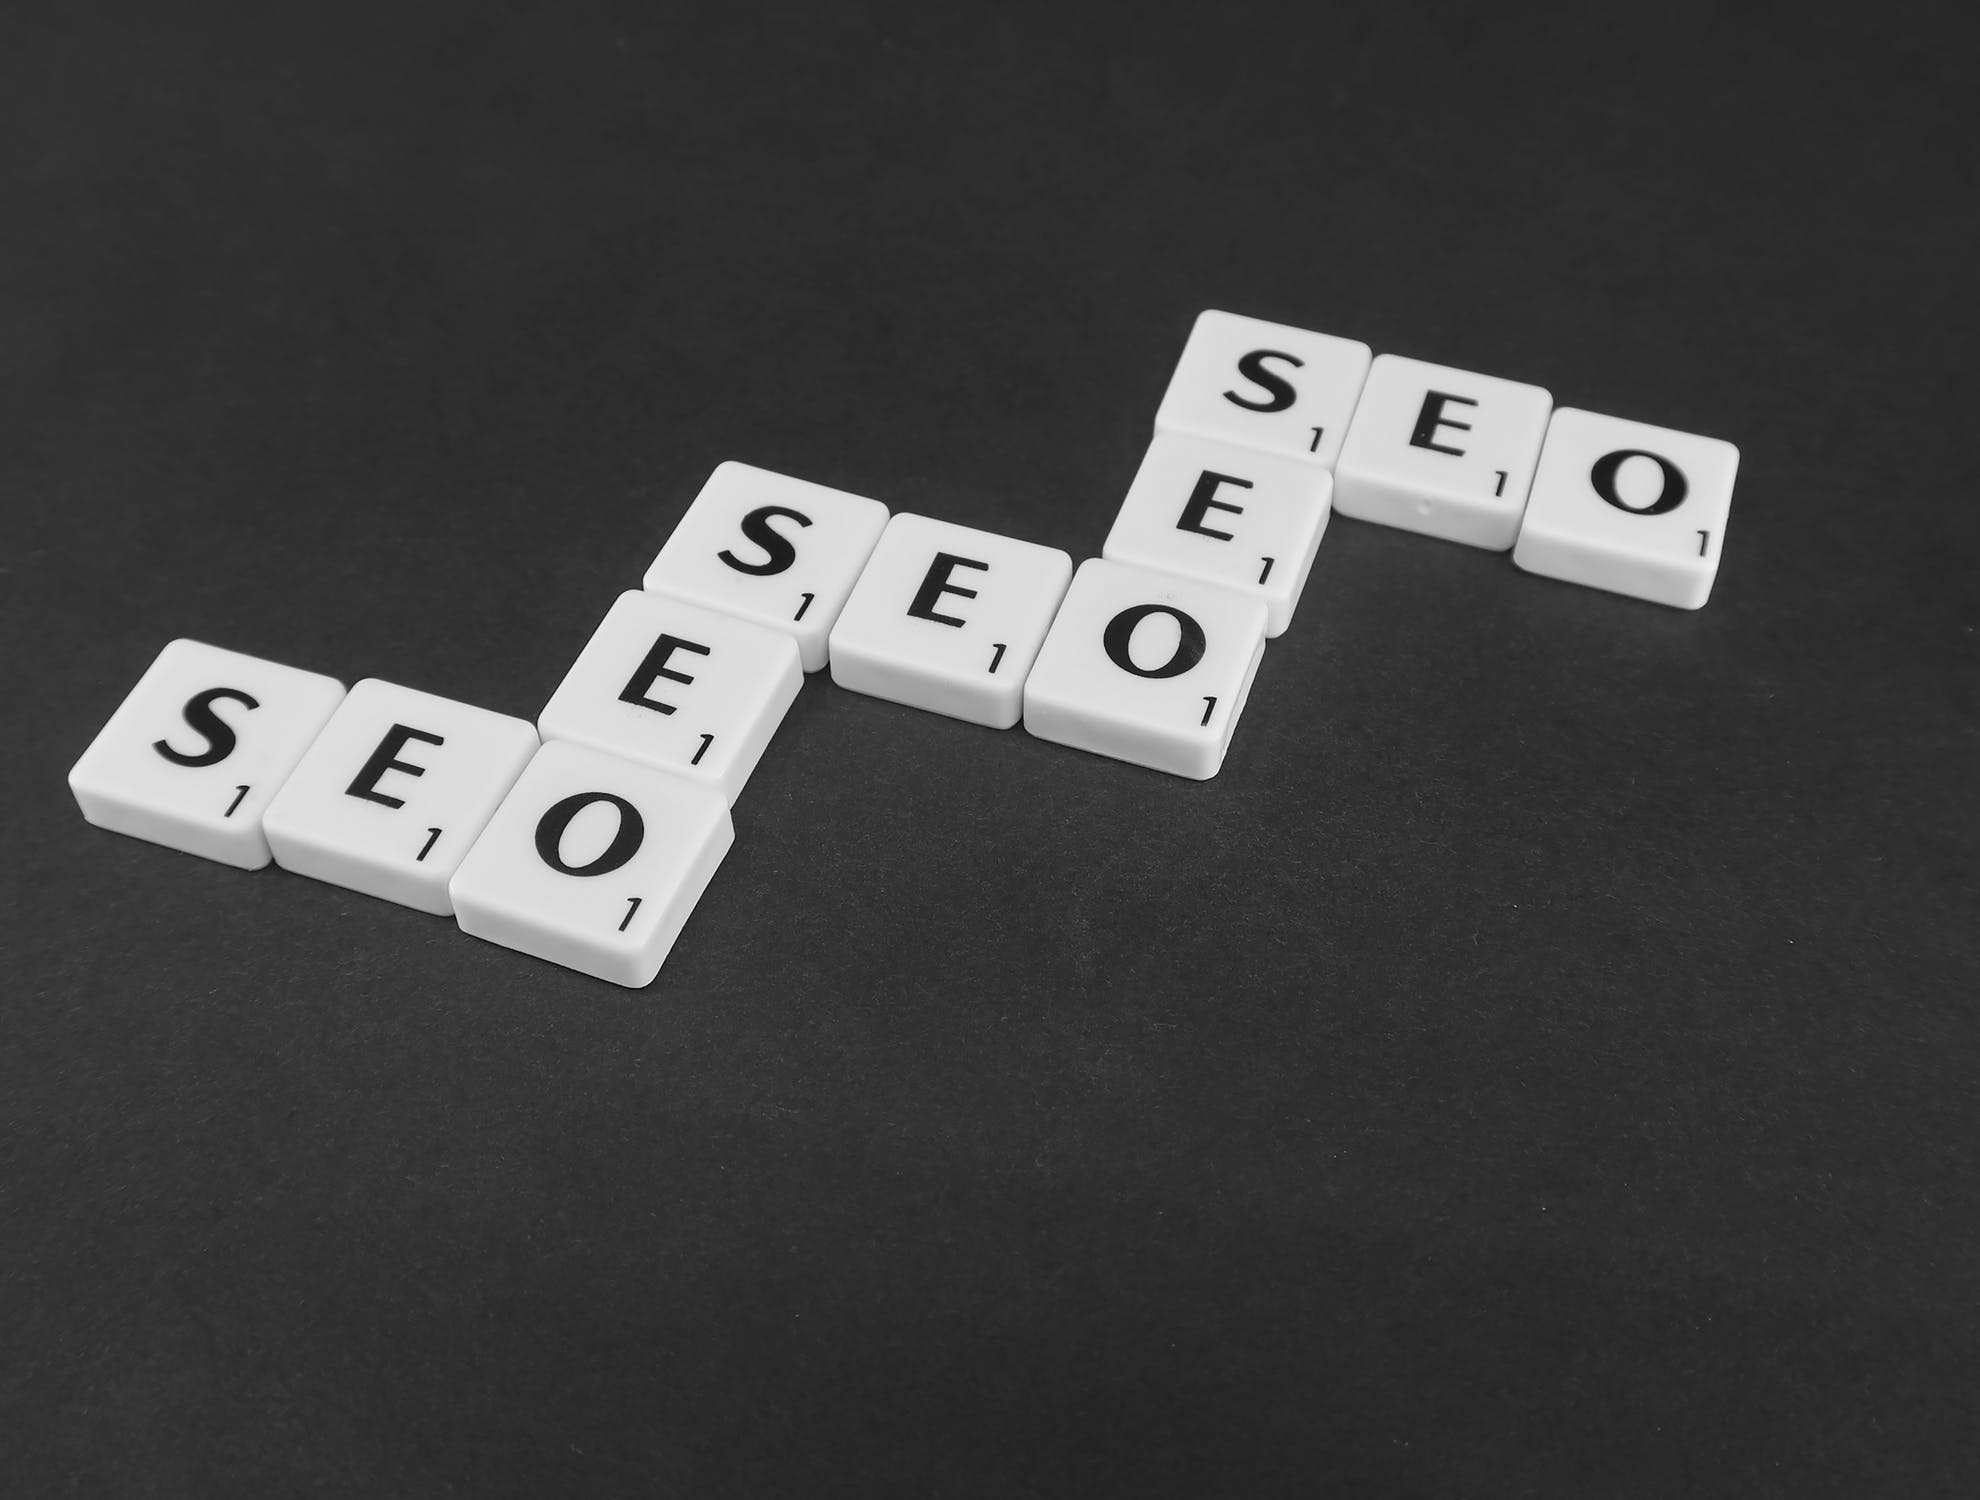 SEO Practices to Avoid at All Cost